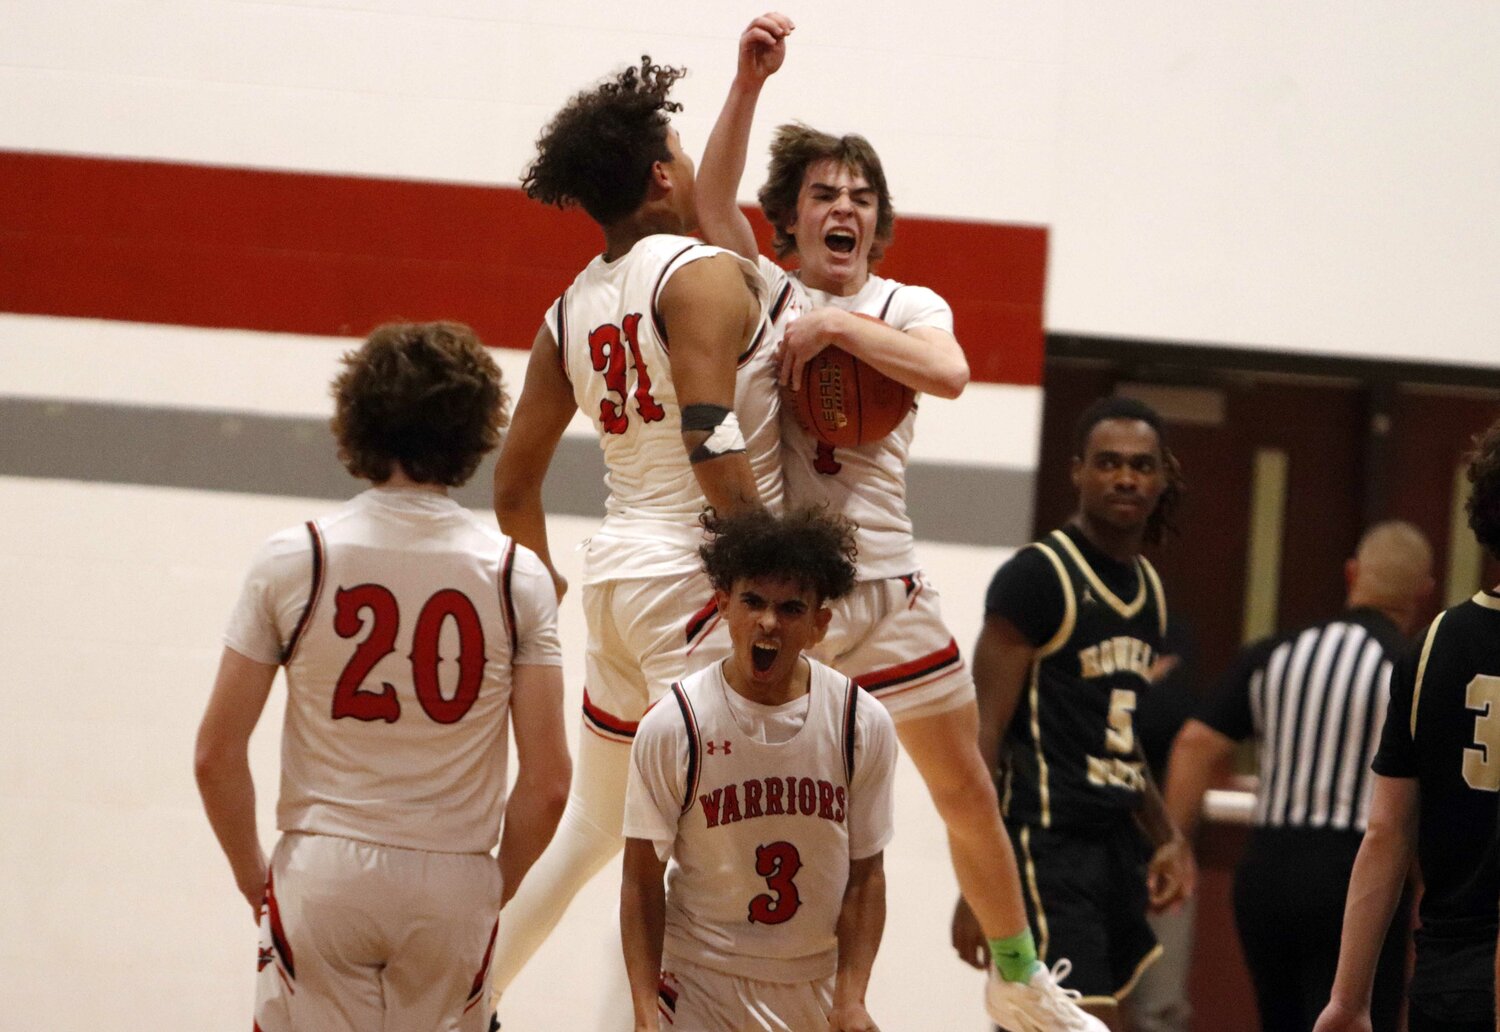 Members of the Warrenton basketball team celebrate after the final buzzer of Warrenton’s 41-35 overtime win over Francis Howell North.